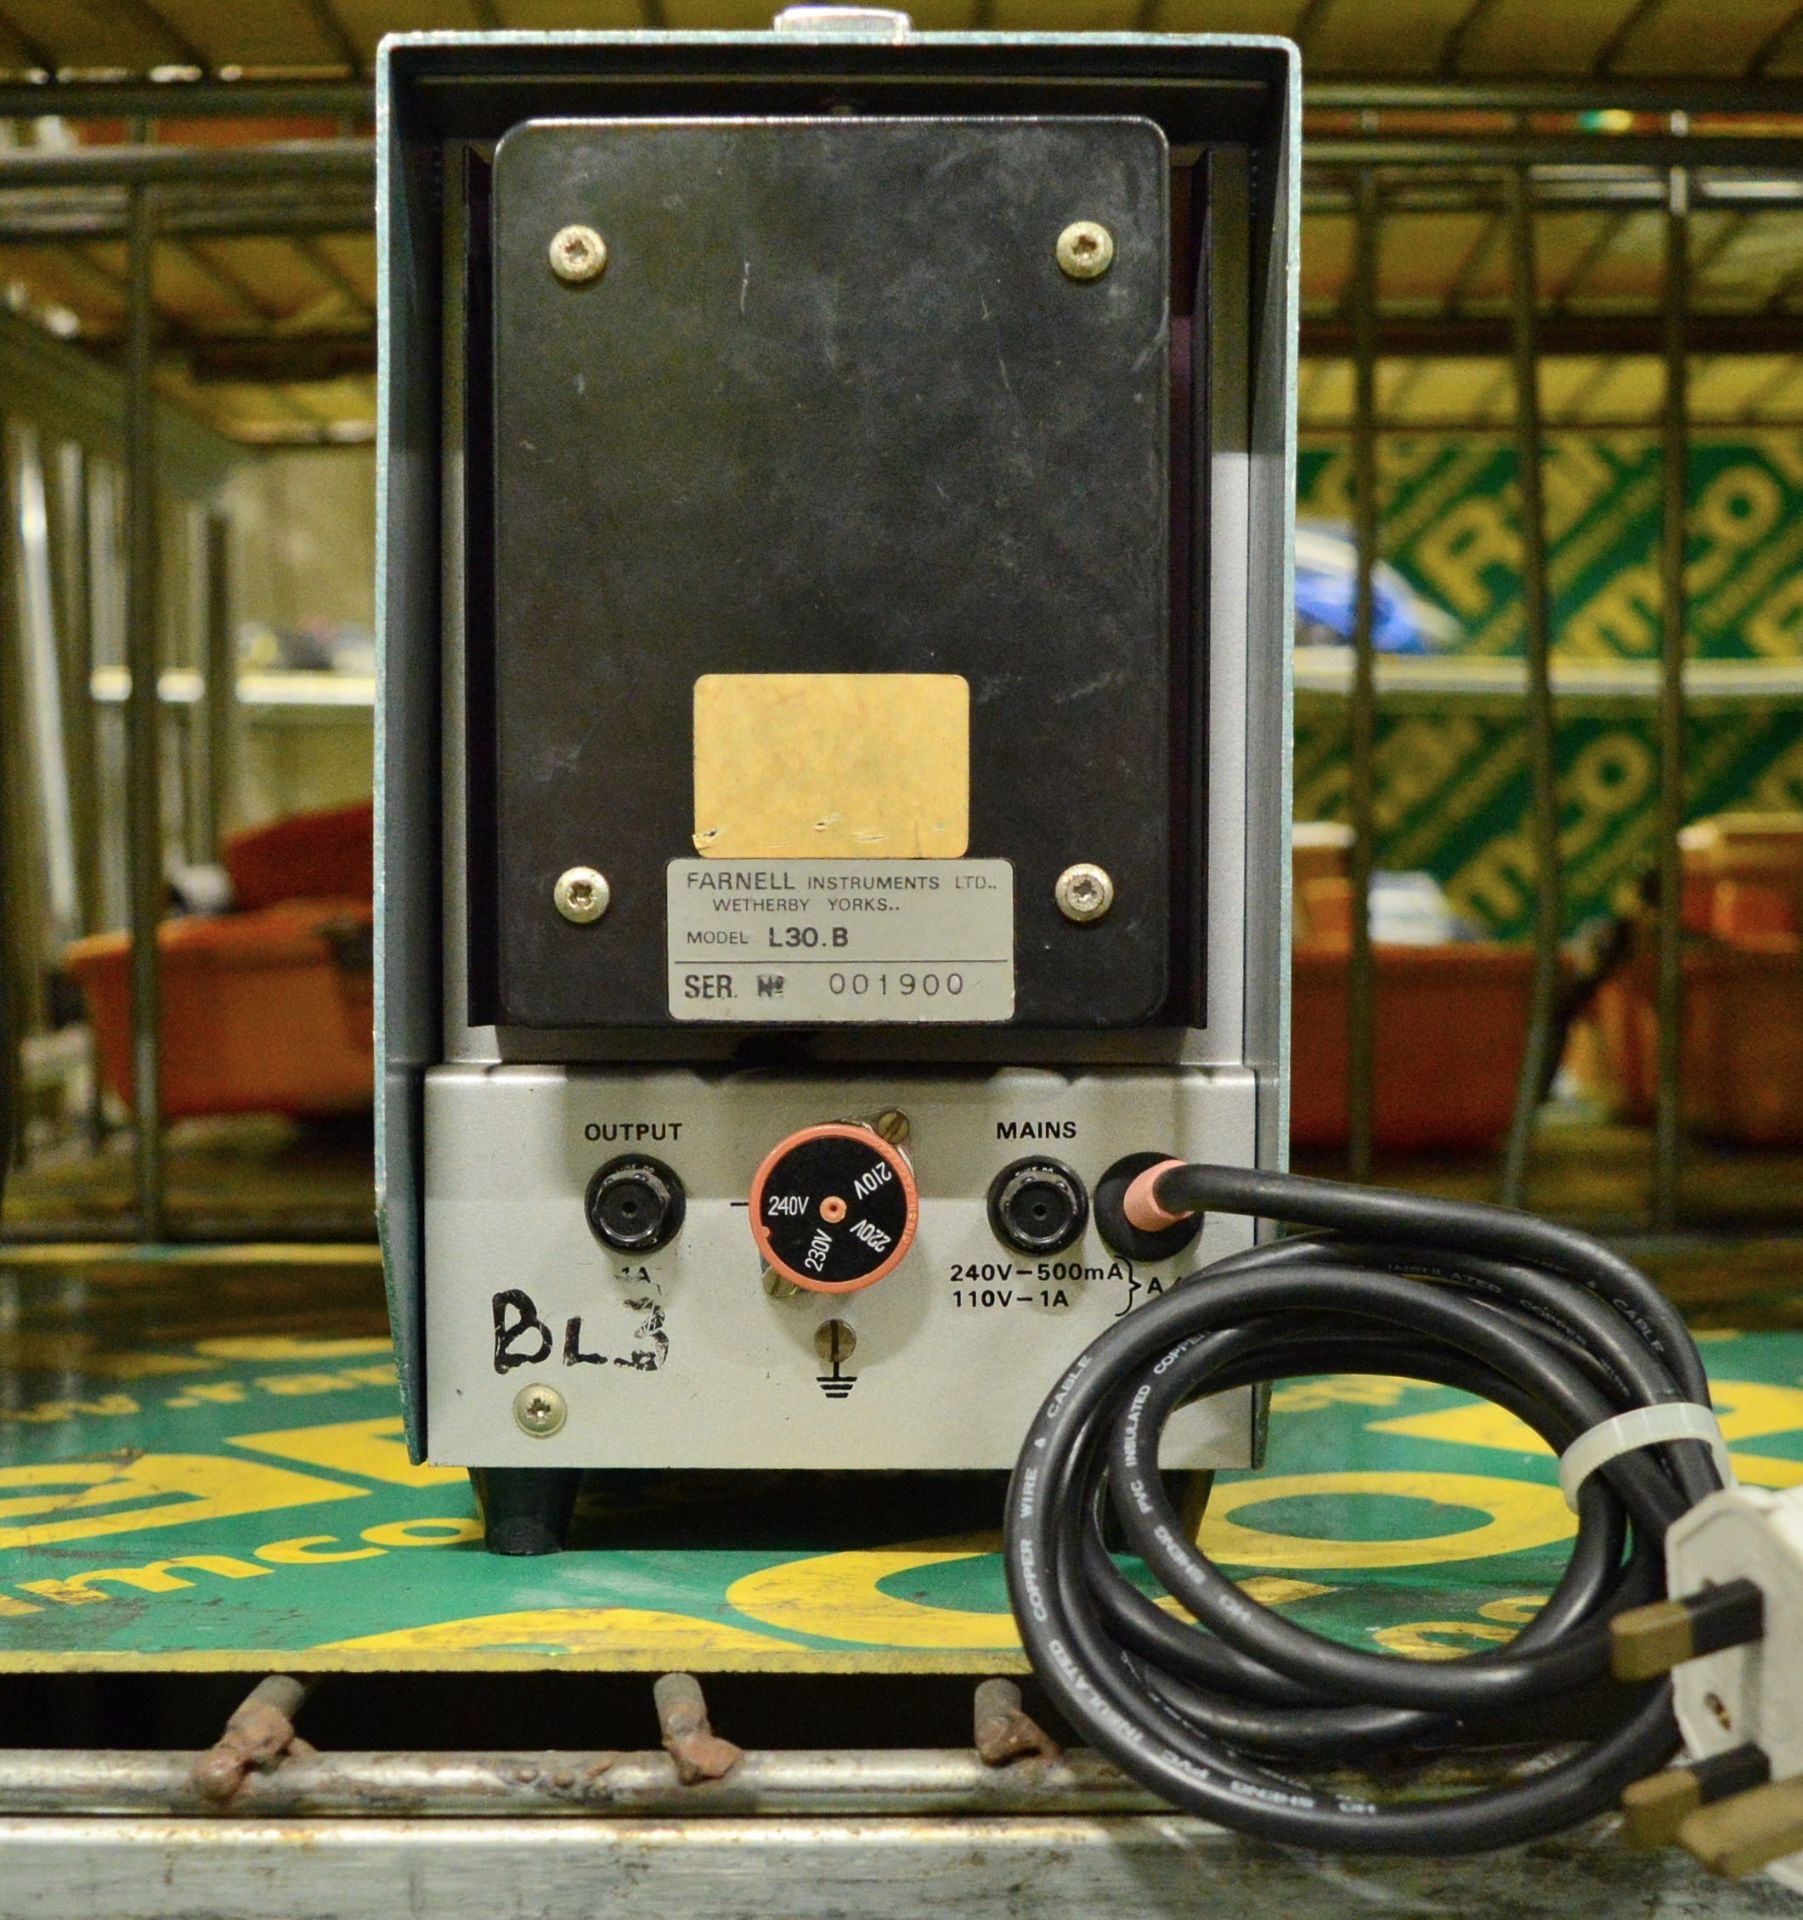 Farnell L30B Stabilised Power Supply Unit - Image 2 of 2